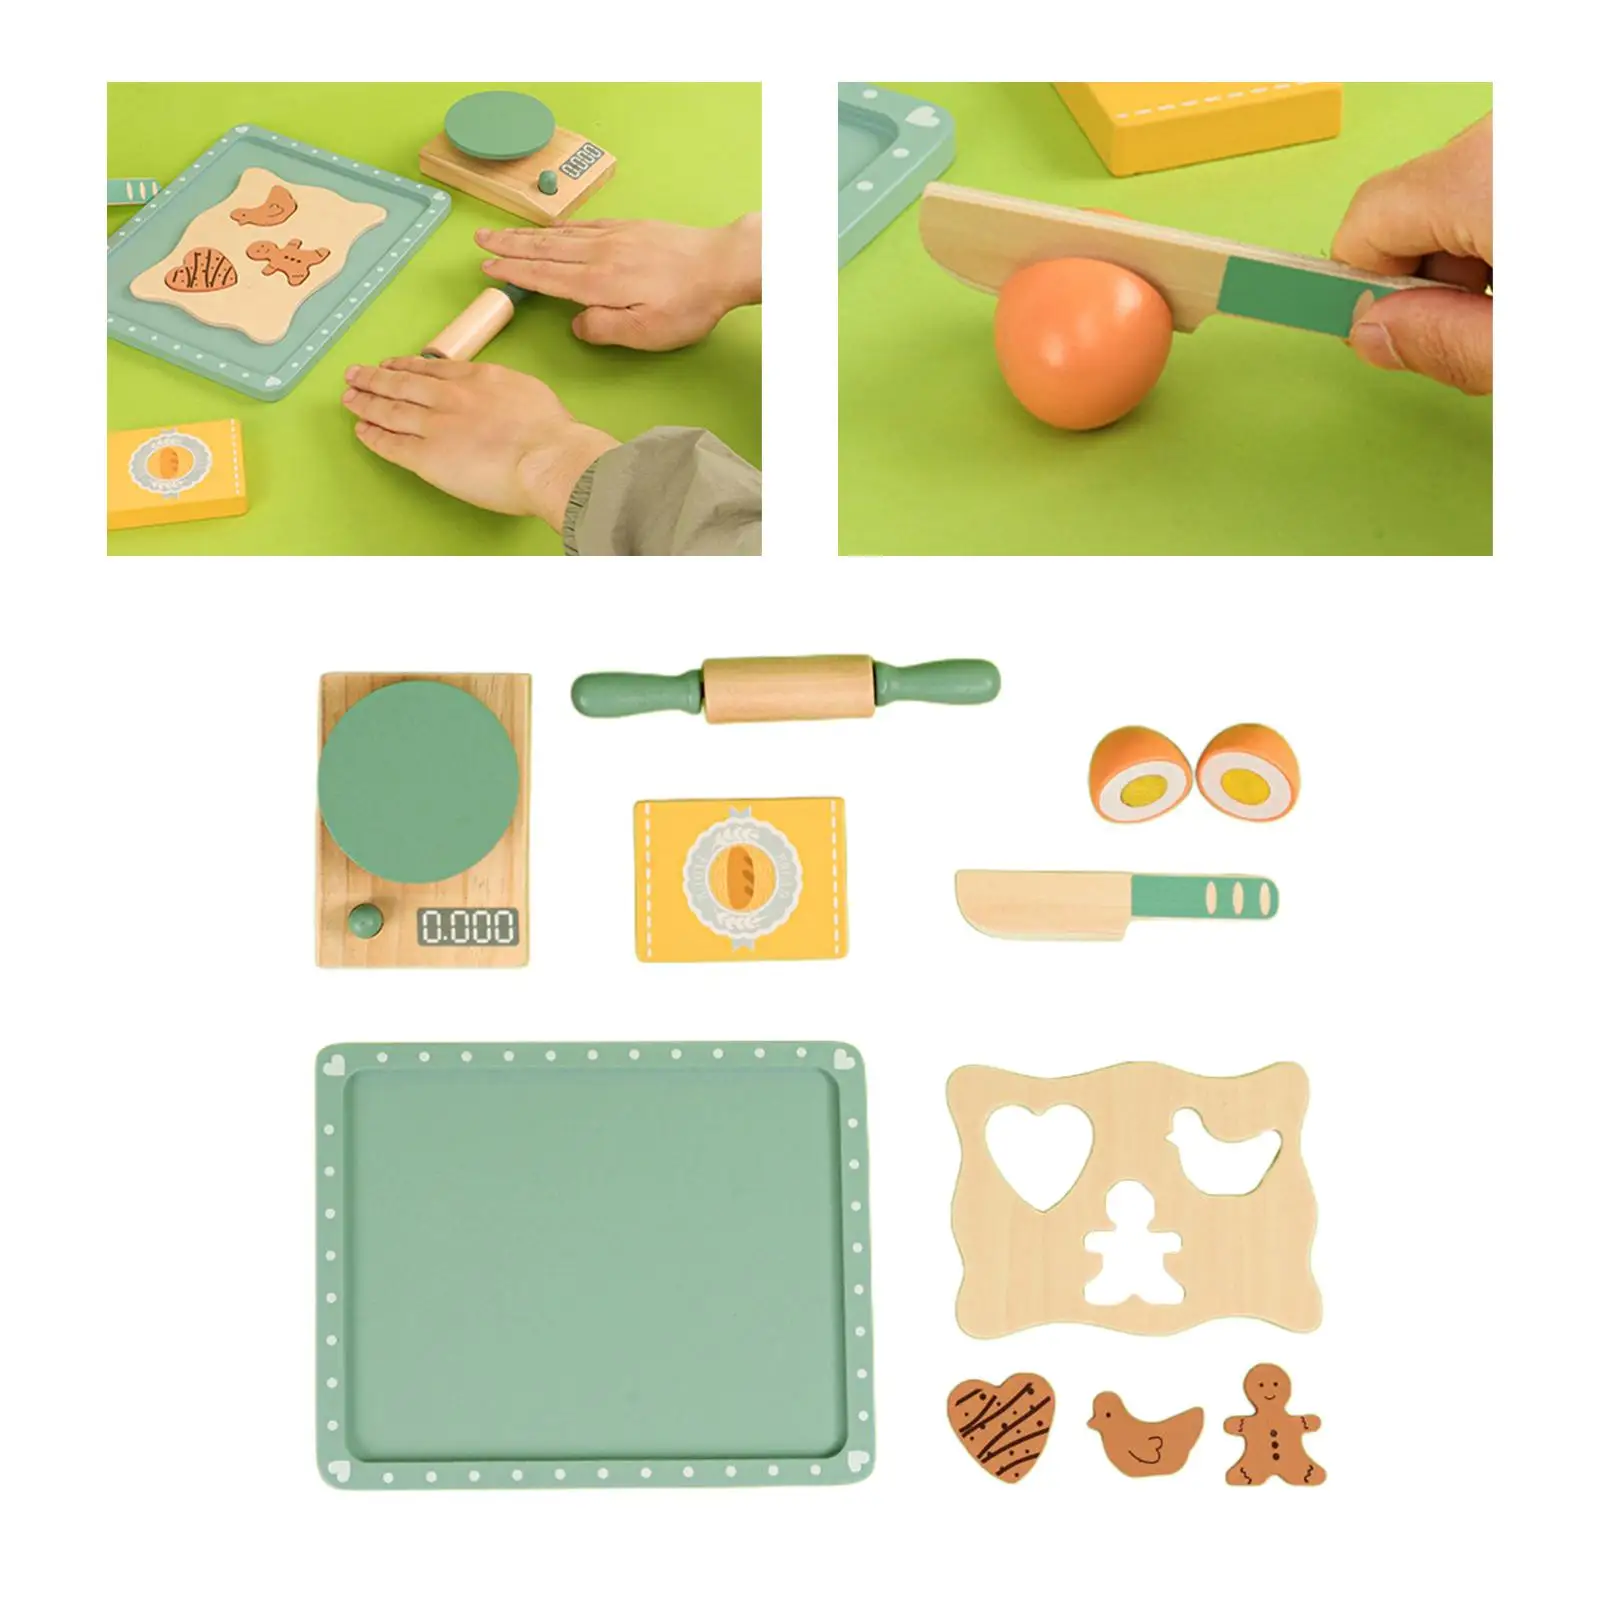 10x Kitchen Cooking and Baking Set Wooden Cookie Play Food Set for Boy Girl